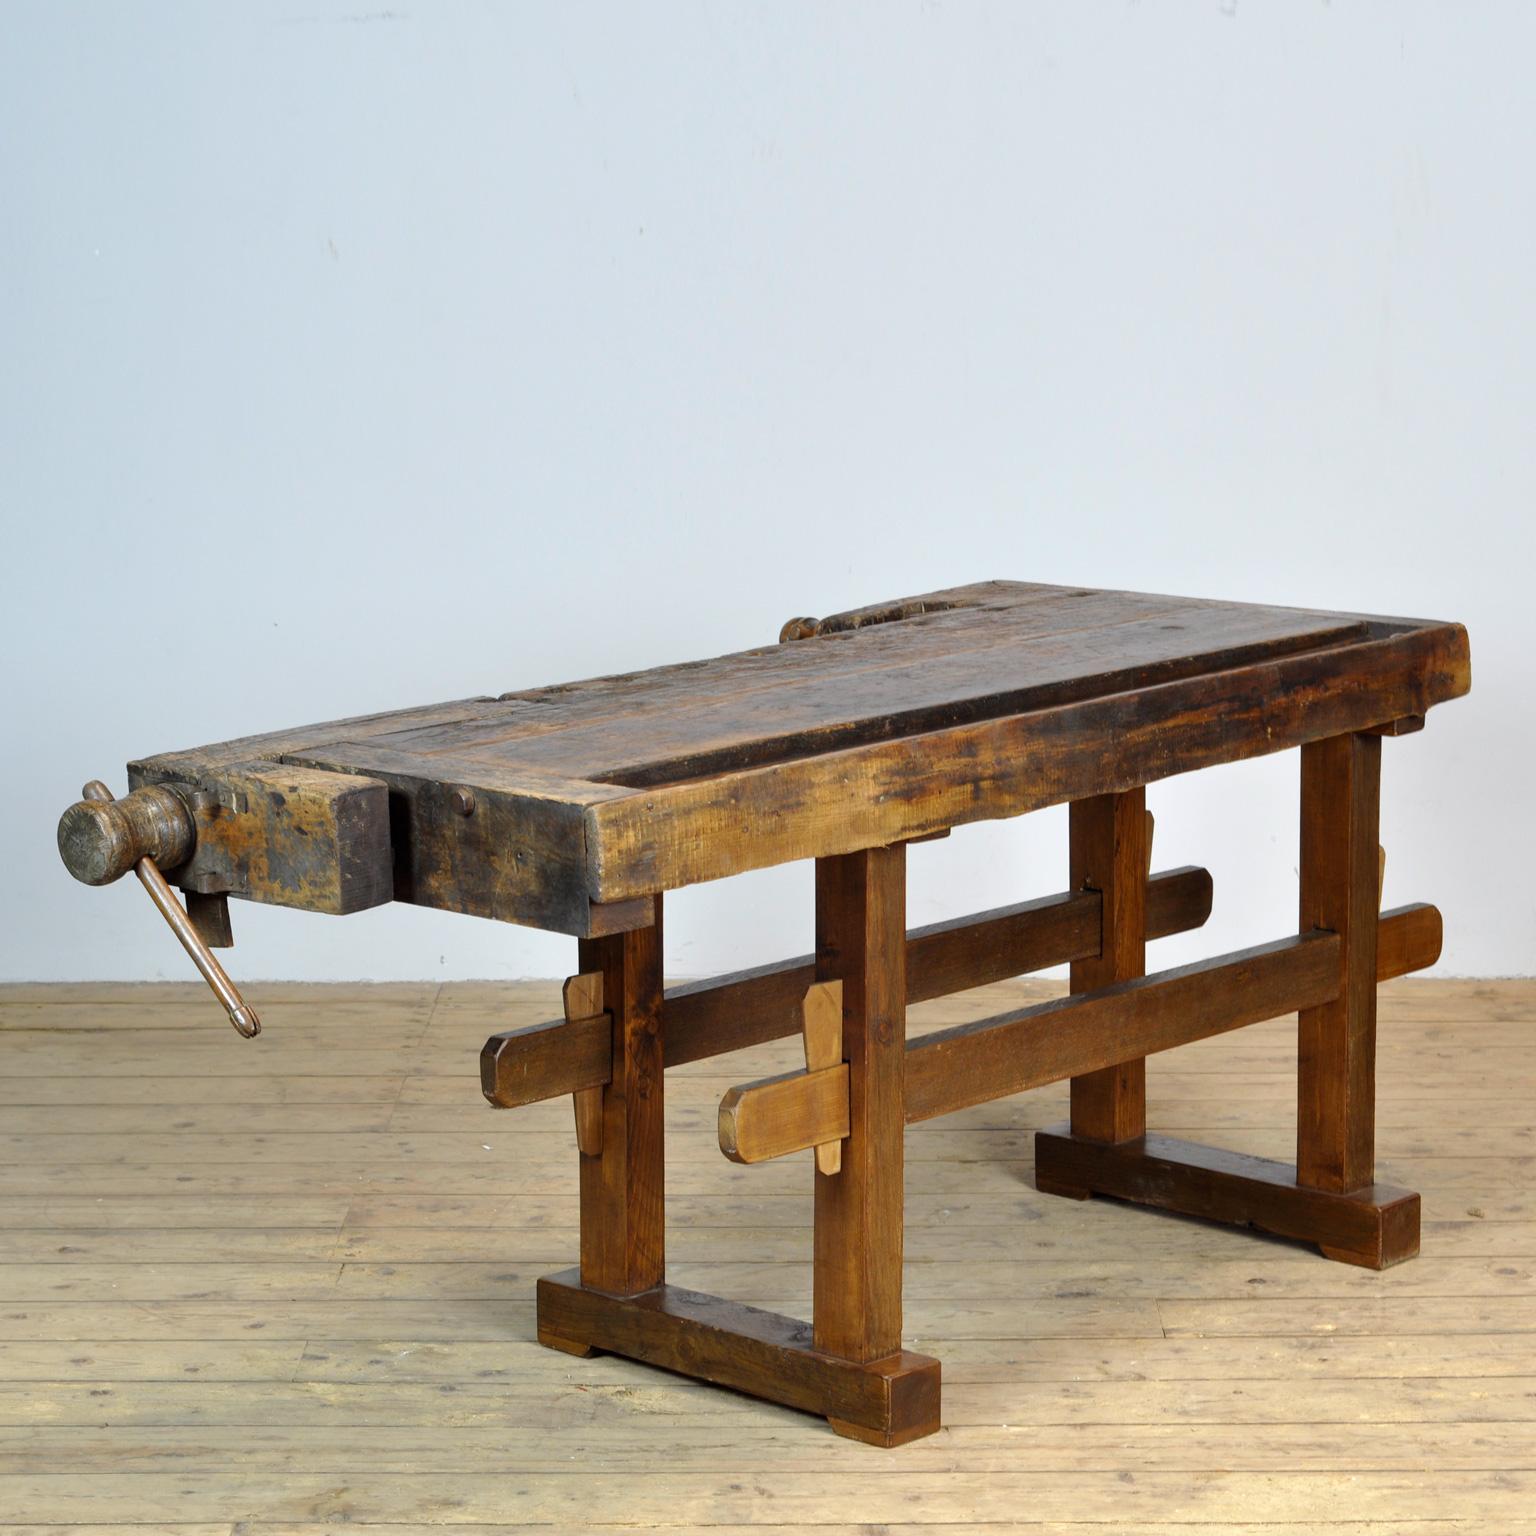 This antique workbench has two built-in wooden vices screws and a recessed tray where the carpenter would put his tools. It was manufactured around 1930. Made from oak. Beautiful patina after years of use. The workbench has been treated for